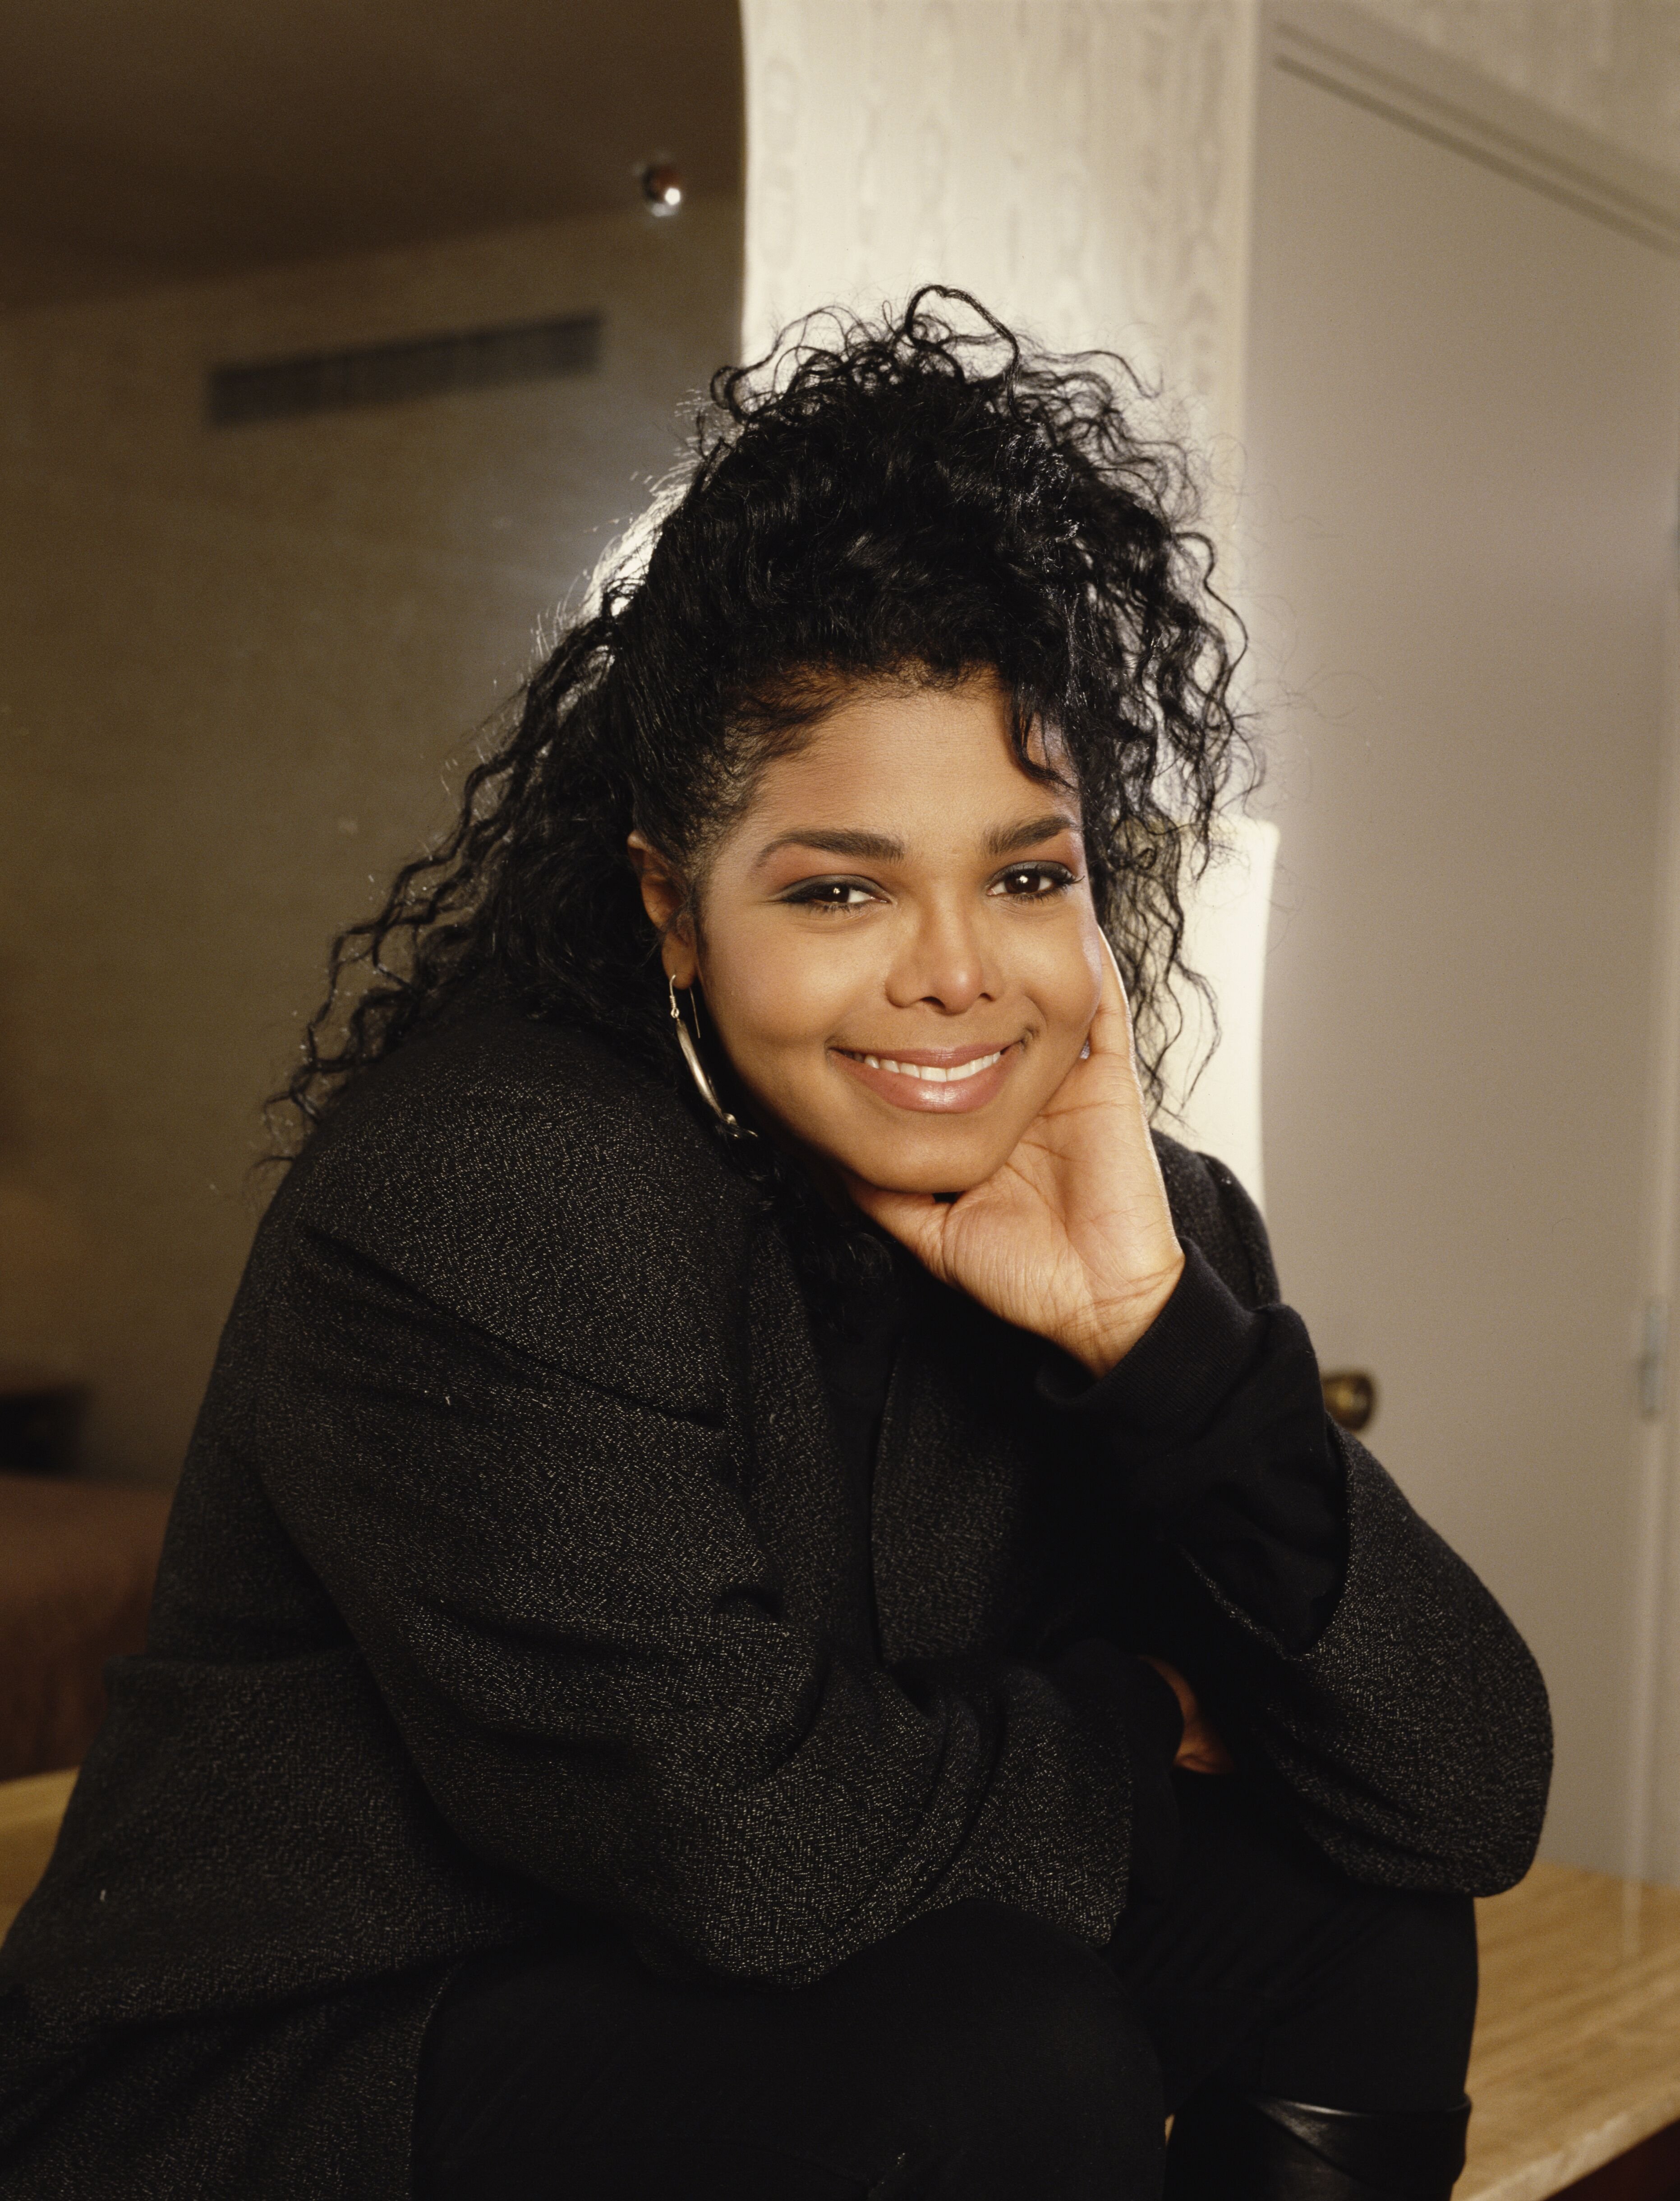  Singer and actress Janet Jackson, circa 1990 | Source: Getty Images